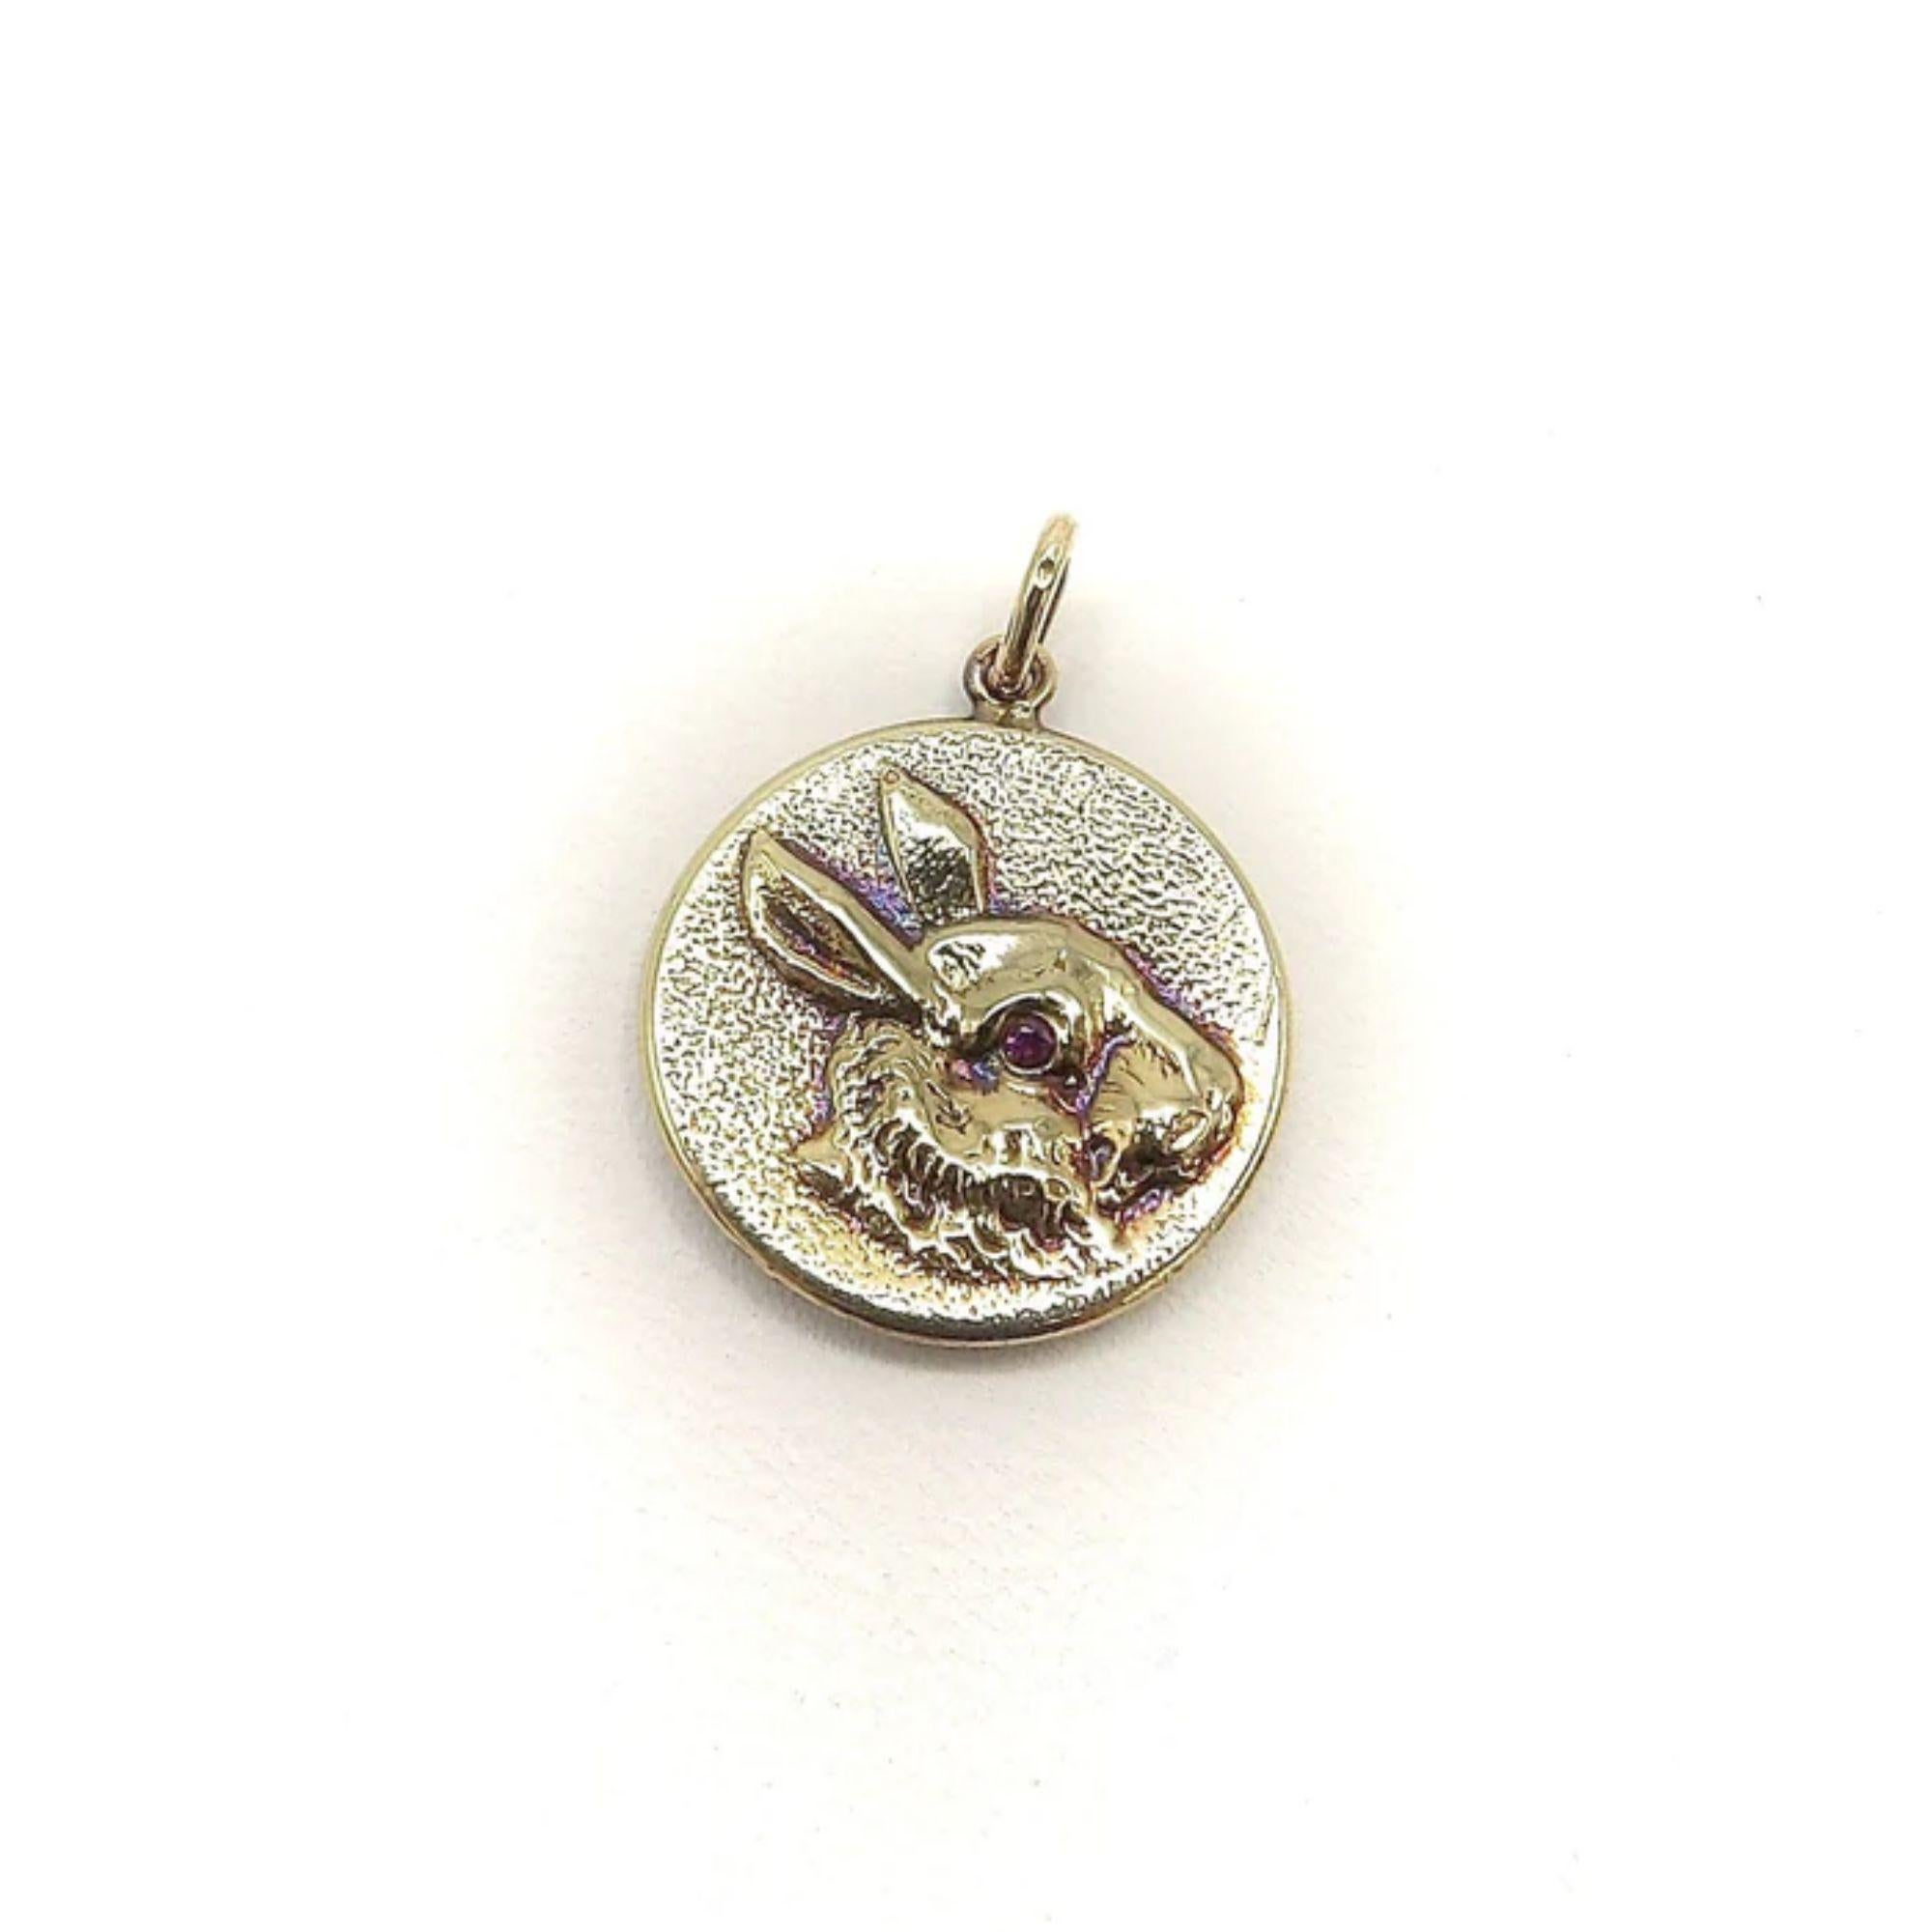 This is a precious 14k gold medallion charm from Kirsten’s Corner signature “Cute as a Button” collection. It is handcrafted and molded from a Victorian-era button and features a portrait of a rabbit. The face has striking ruby eyes that offer a